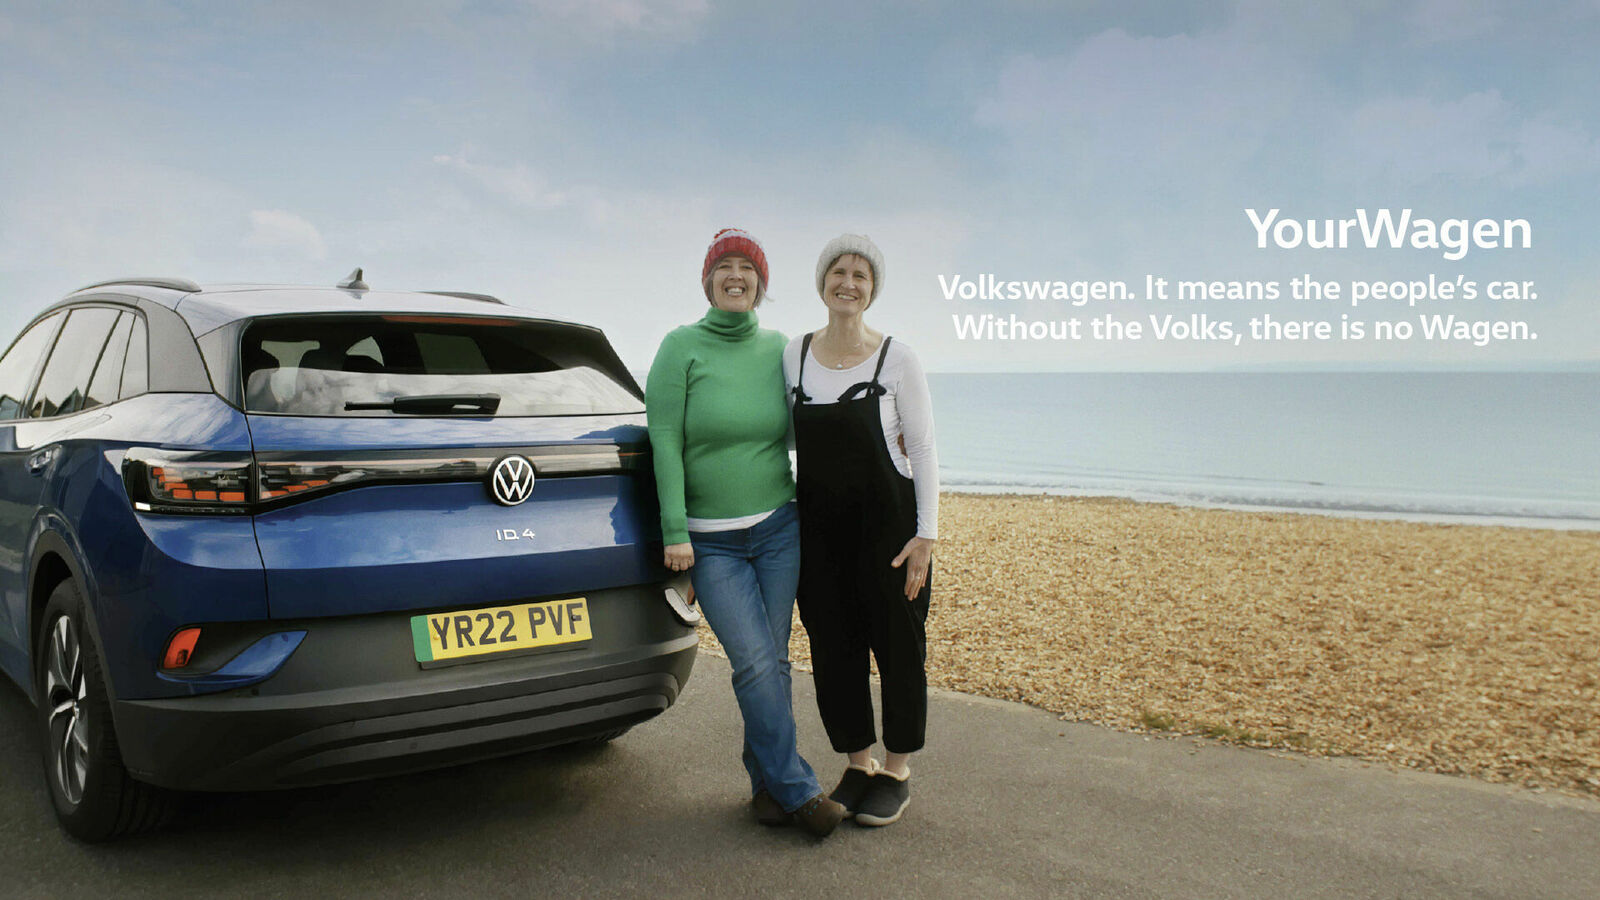 New Volkswagen campaign tells customers’ personal stories